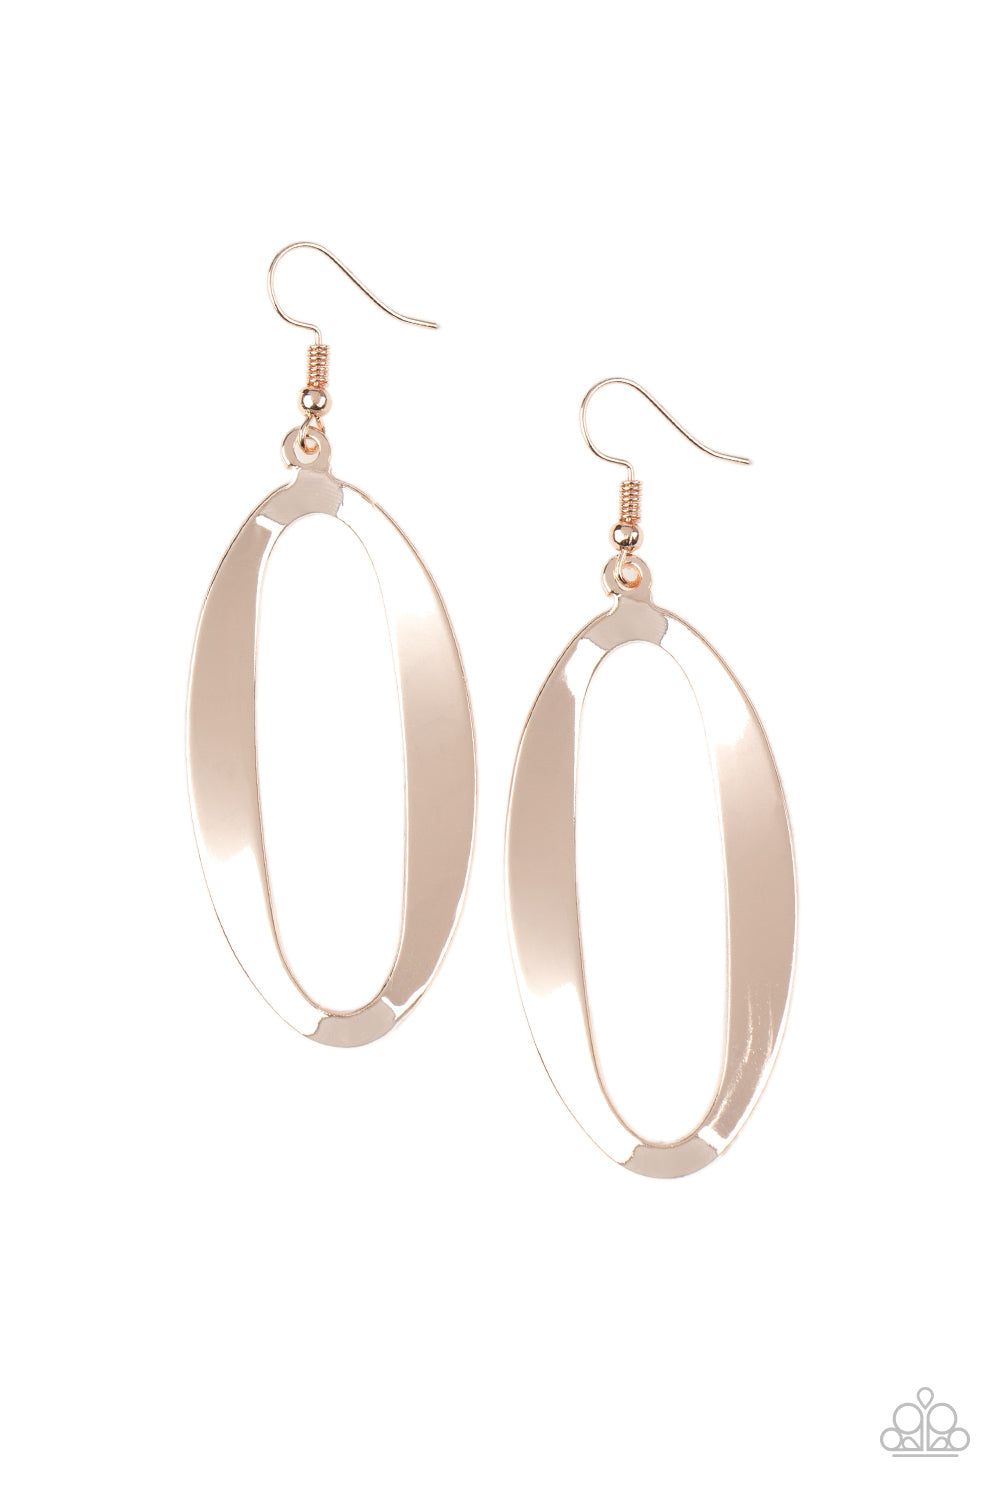 OVAL My Head - Rose Gold Earrings - Paparazzi Accessories - Jazzy Jewels With Lady J